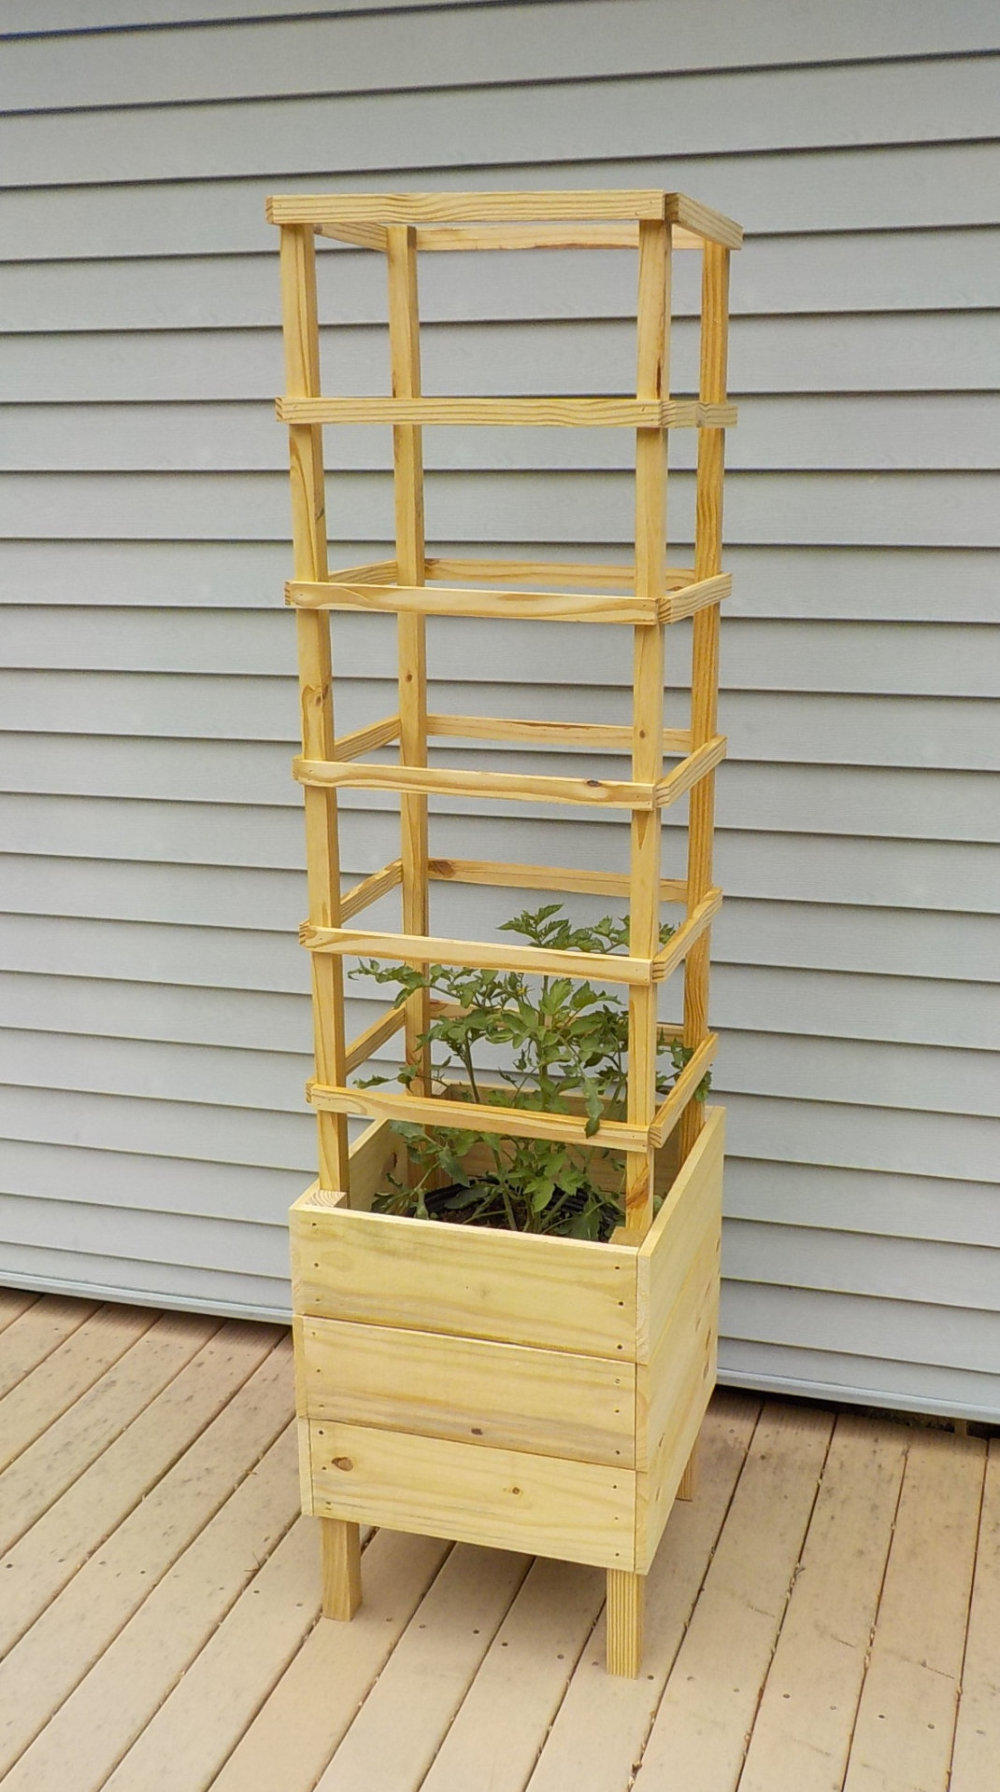 konsulent lejer disharmoni How to Build a Tomato Planter for Your Deck DIY Wood Plans